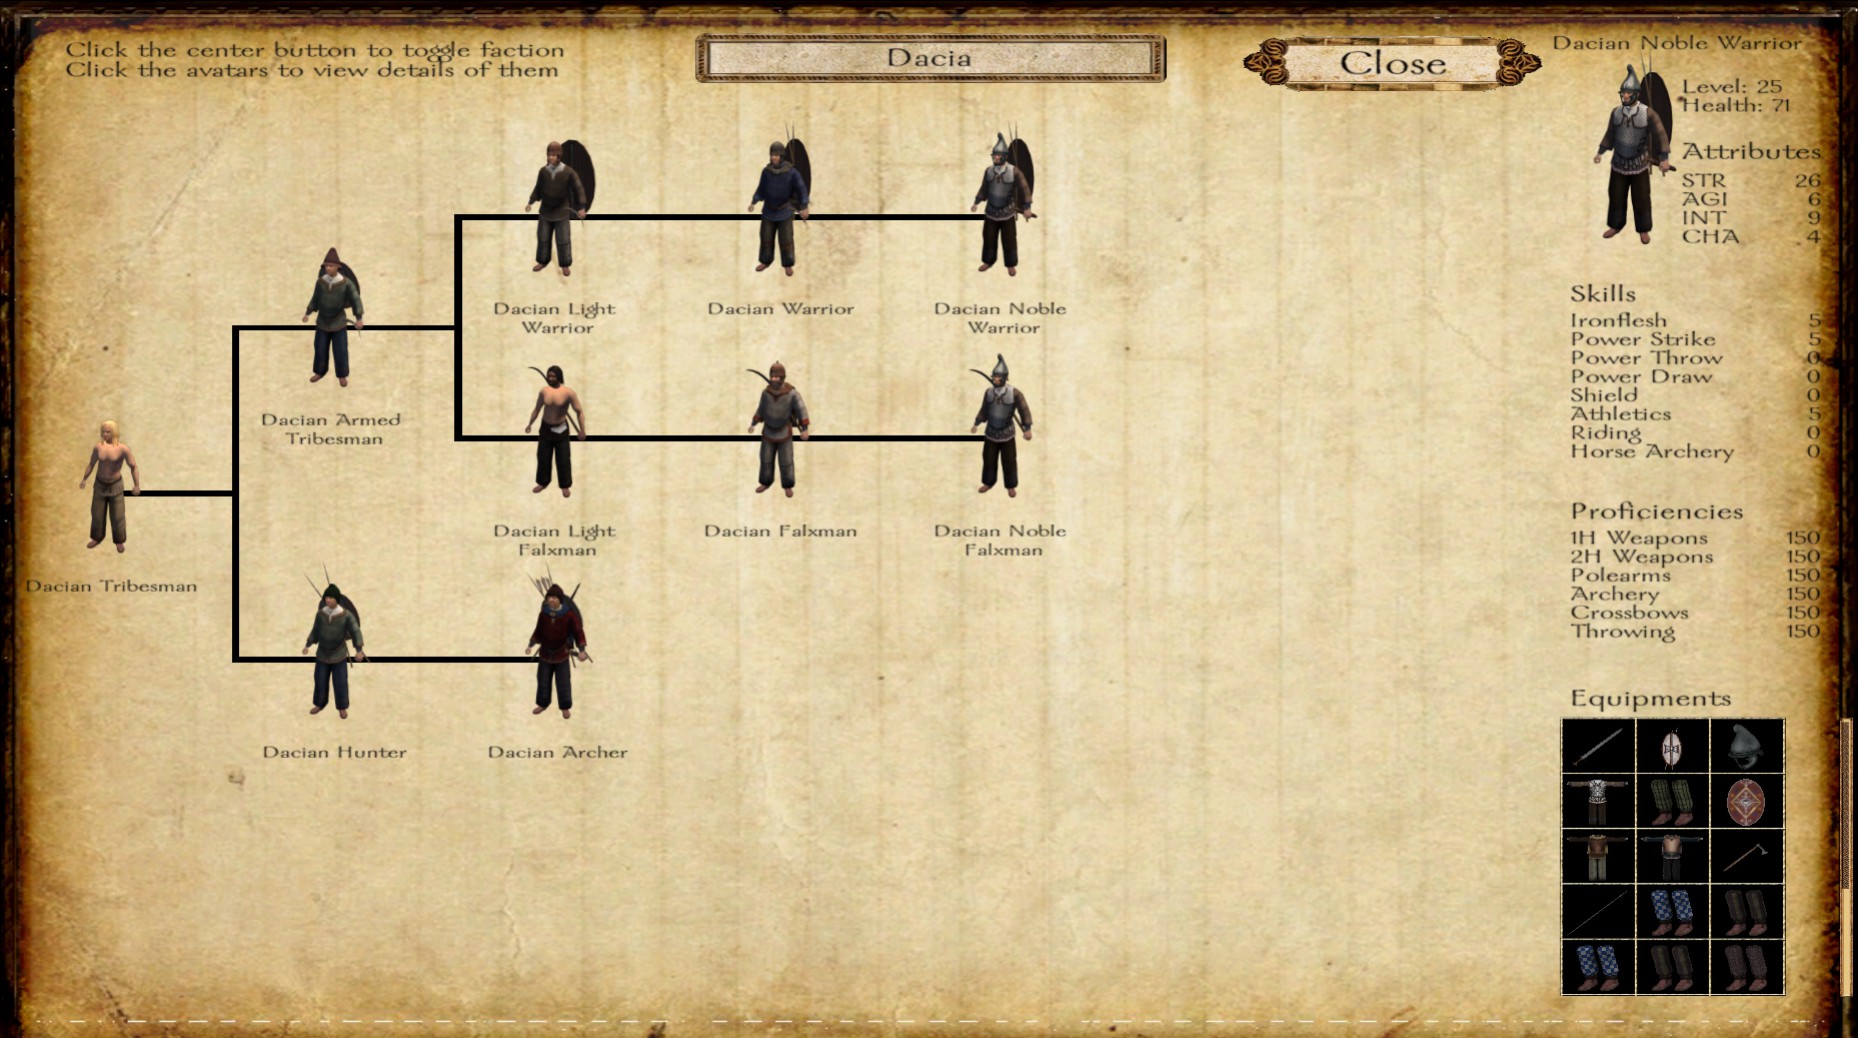 troop trees mount and blade warband